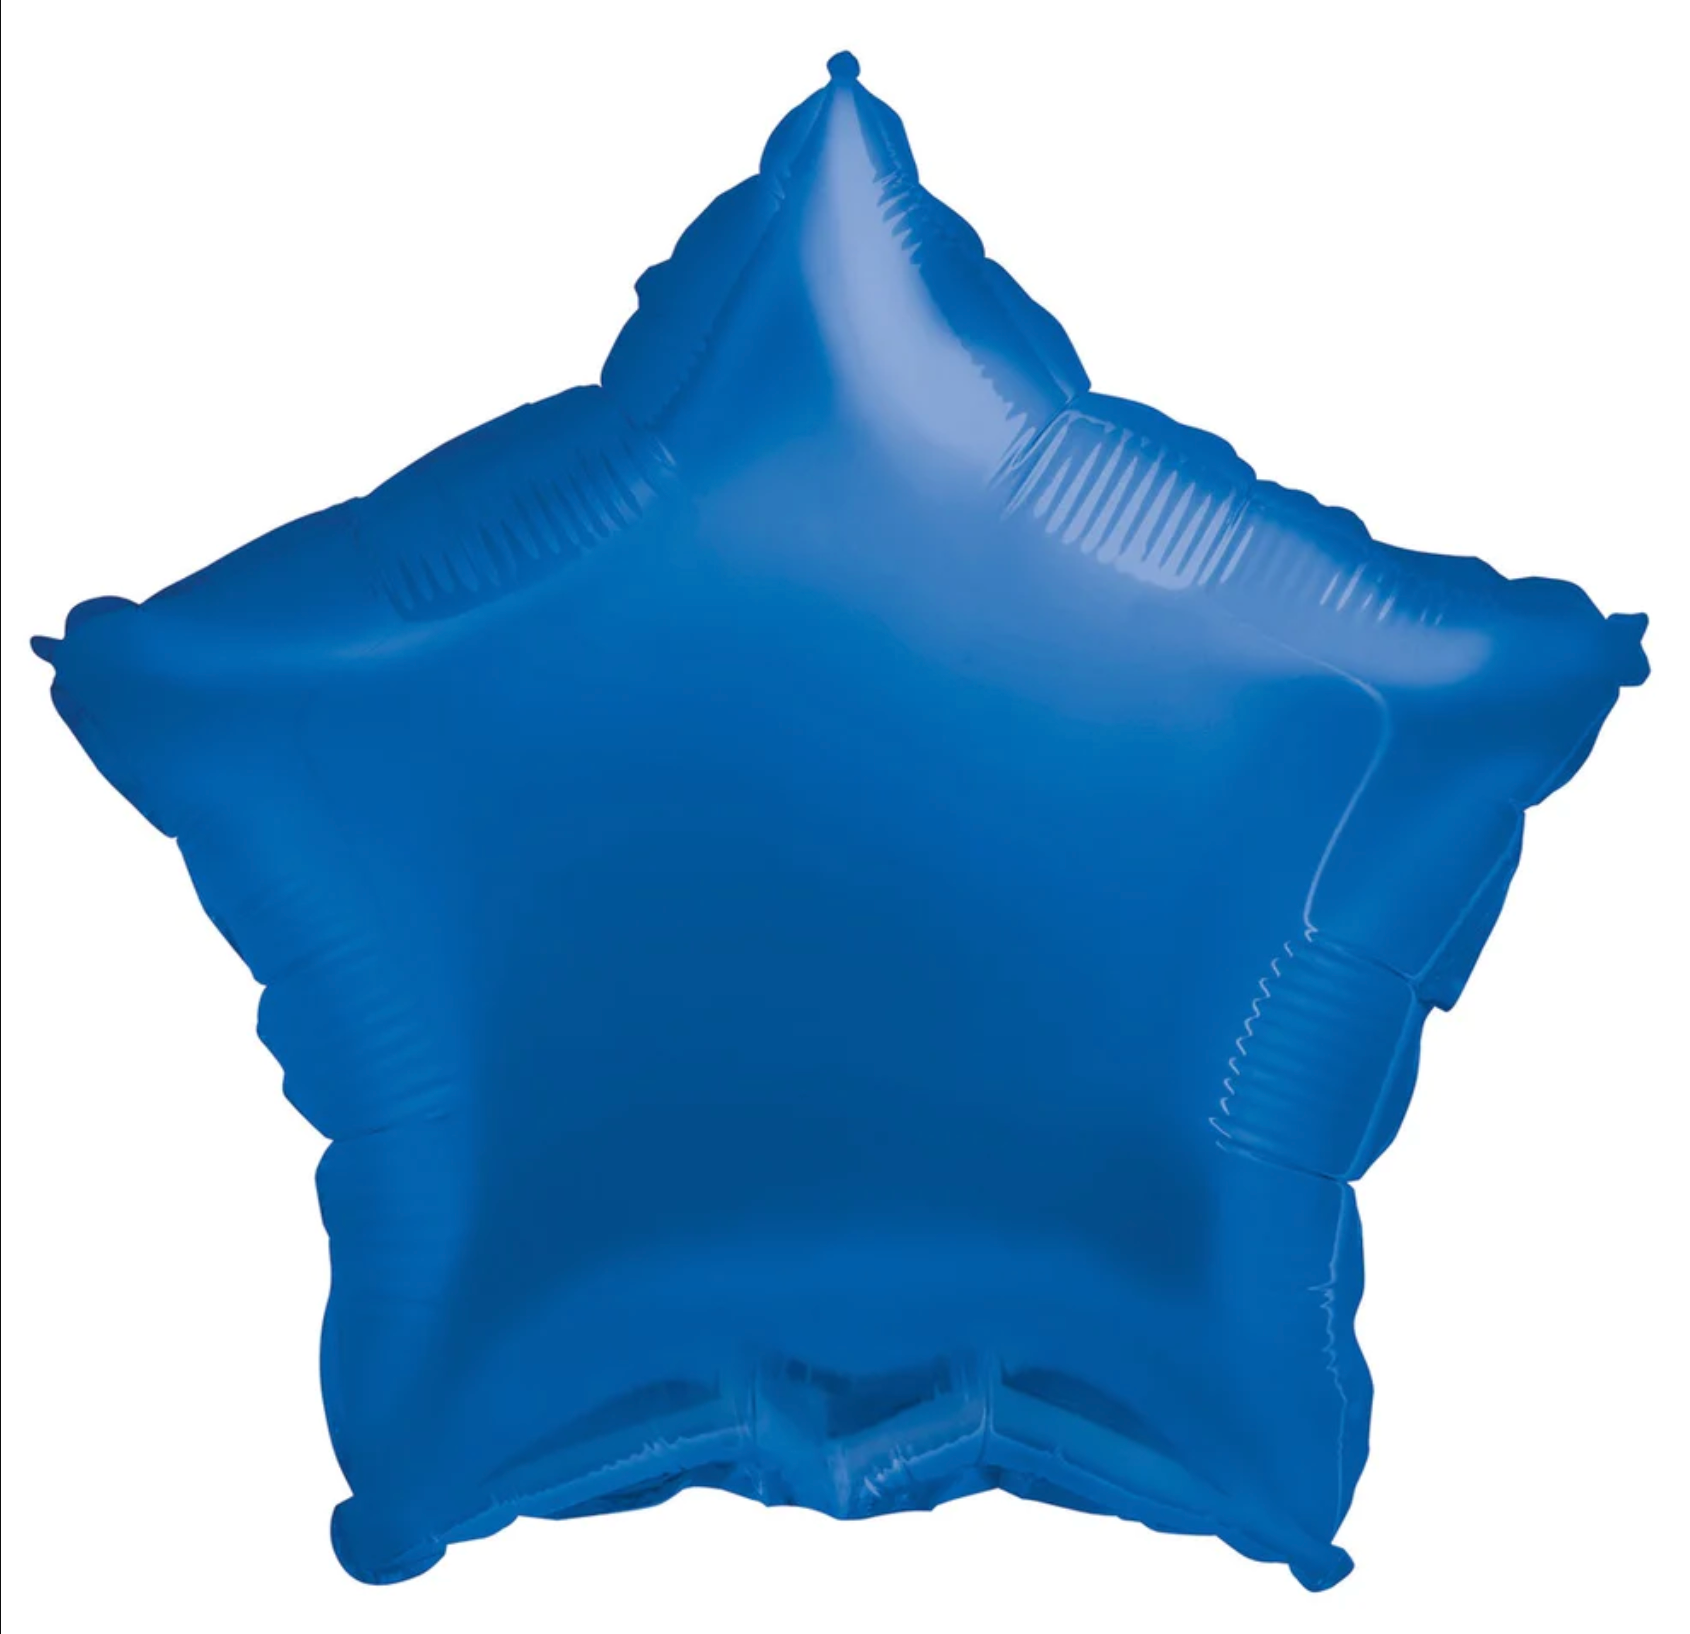 Star Balloon 18" Solid Colors